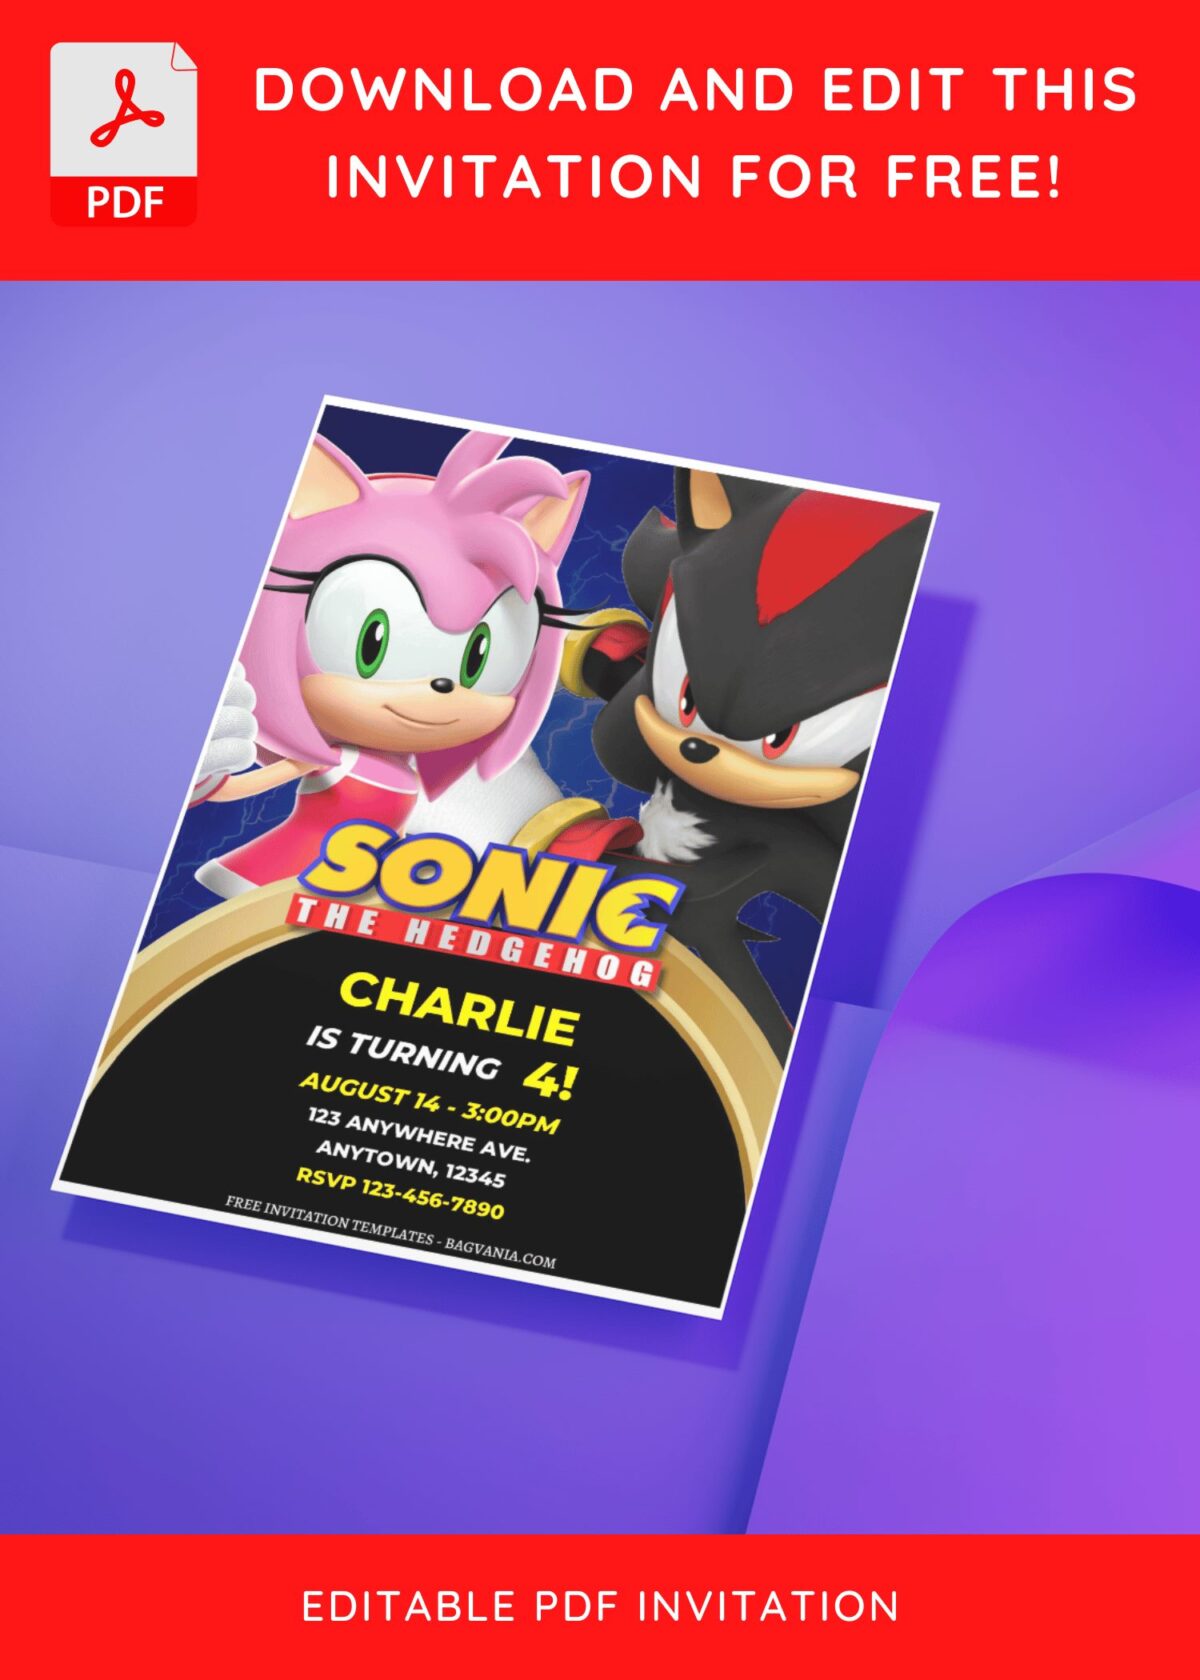 (Free Editable PDF) Blast From The Past Sonic Birthday Invitation Templates with colorful text